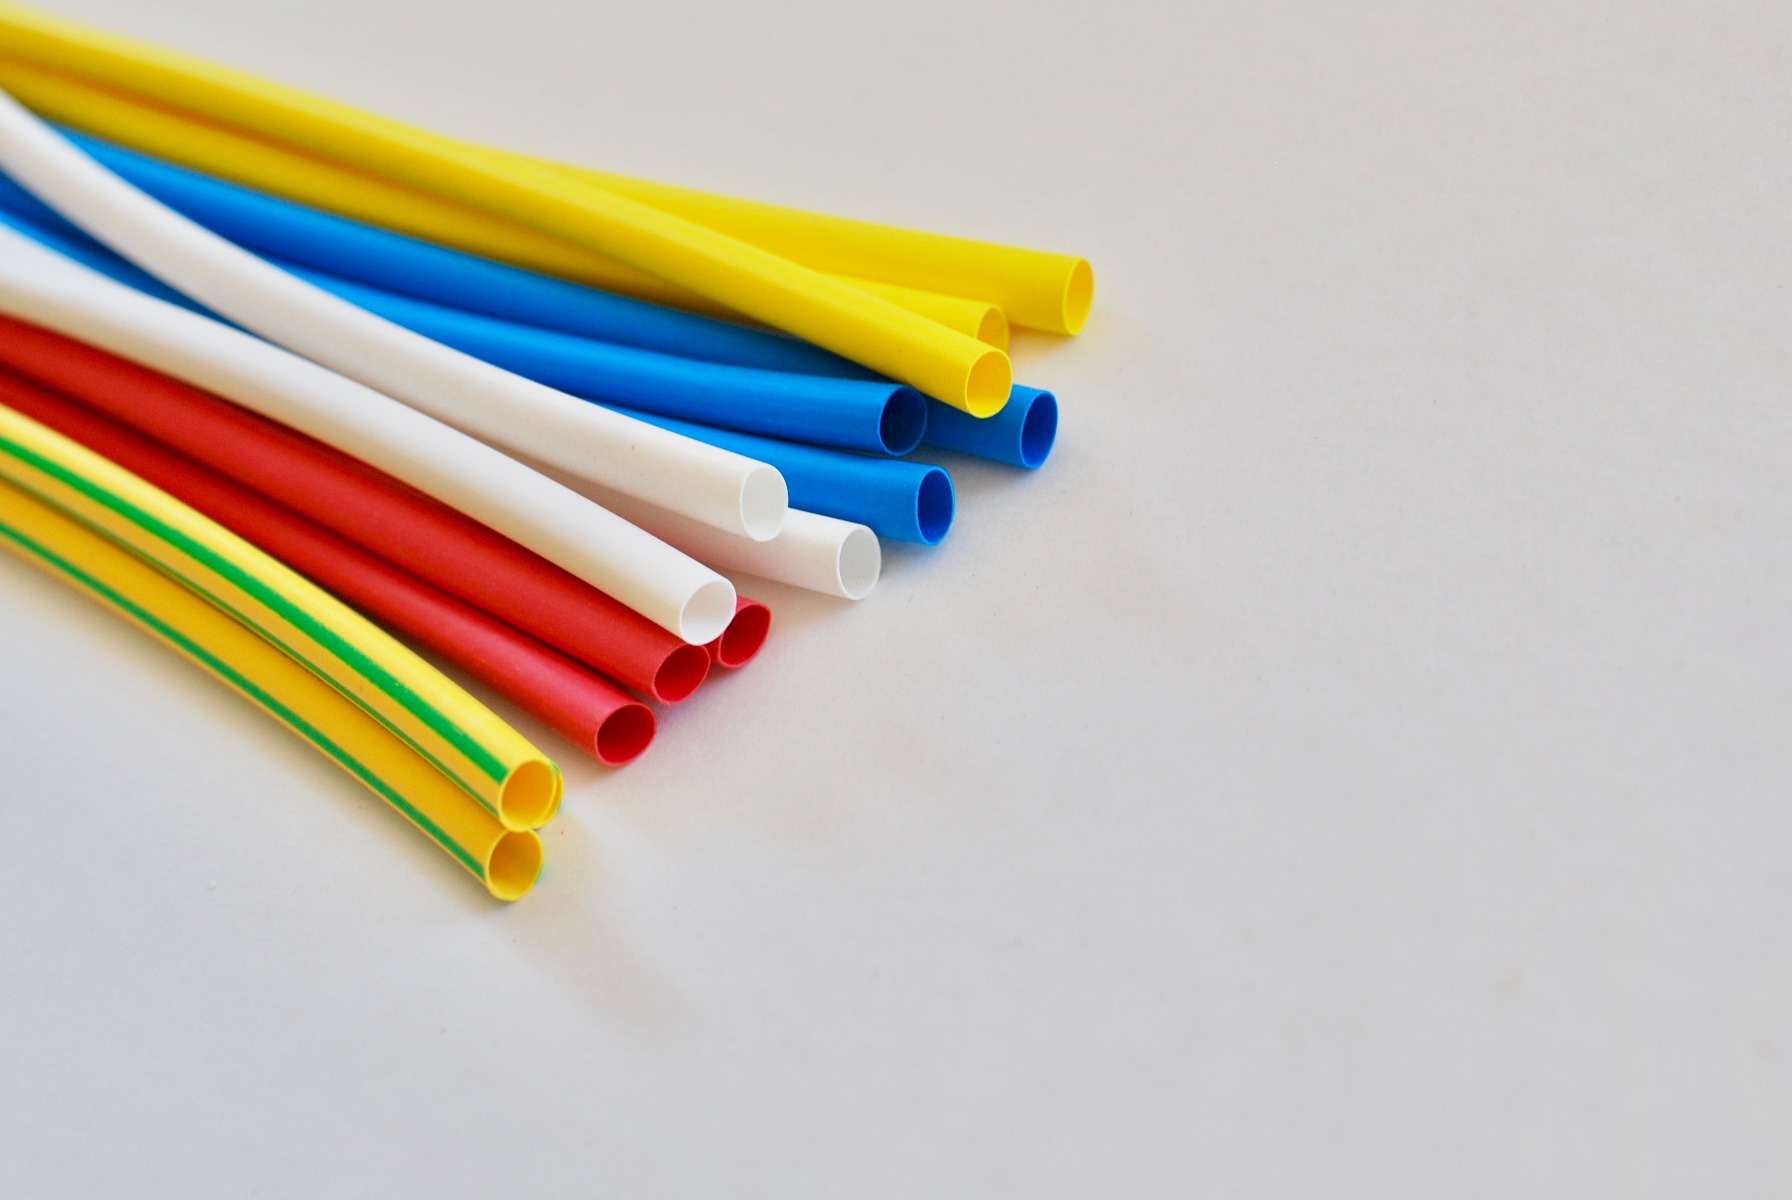 Several colors of heat shrink tubing with very similar sizes.